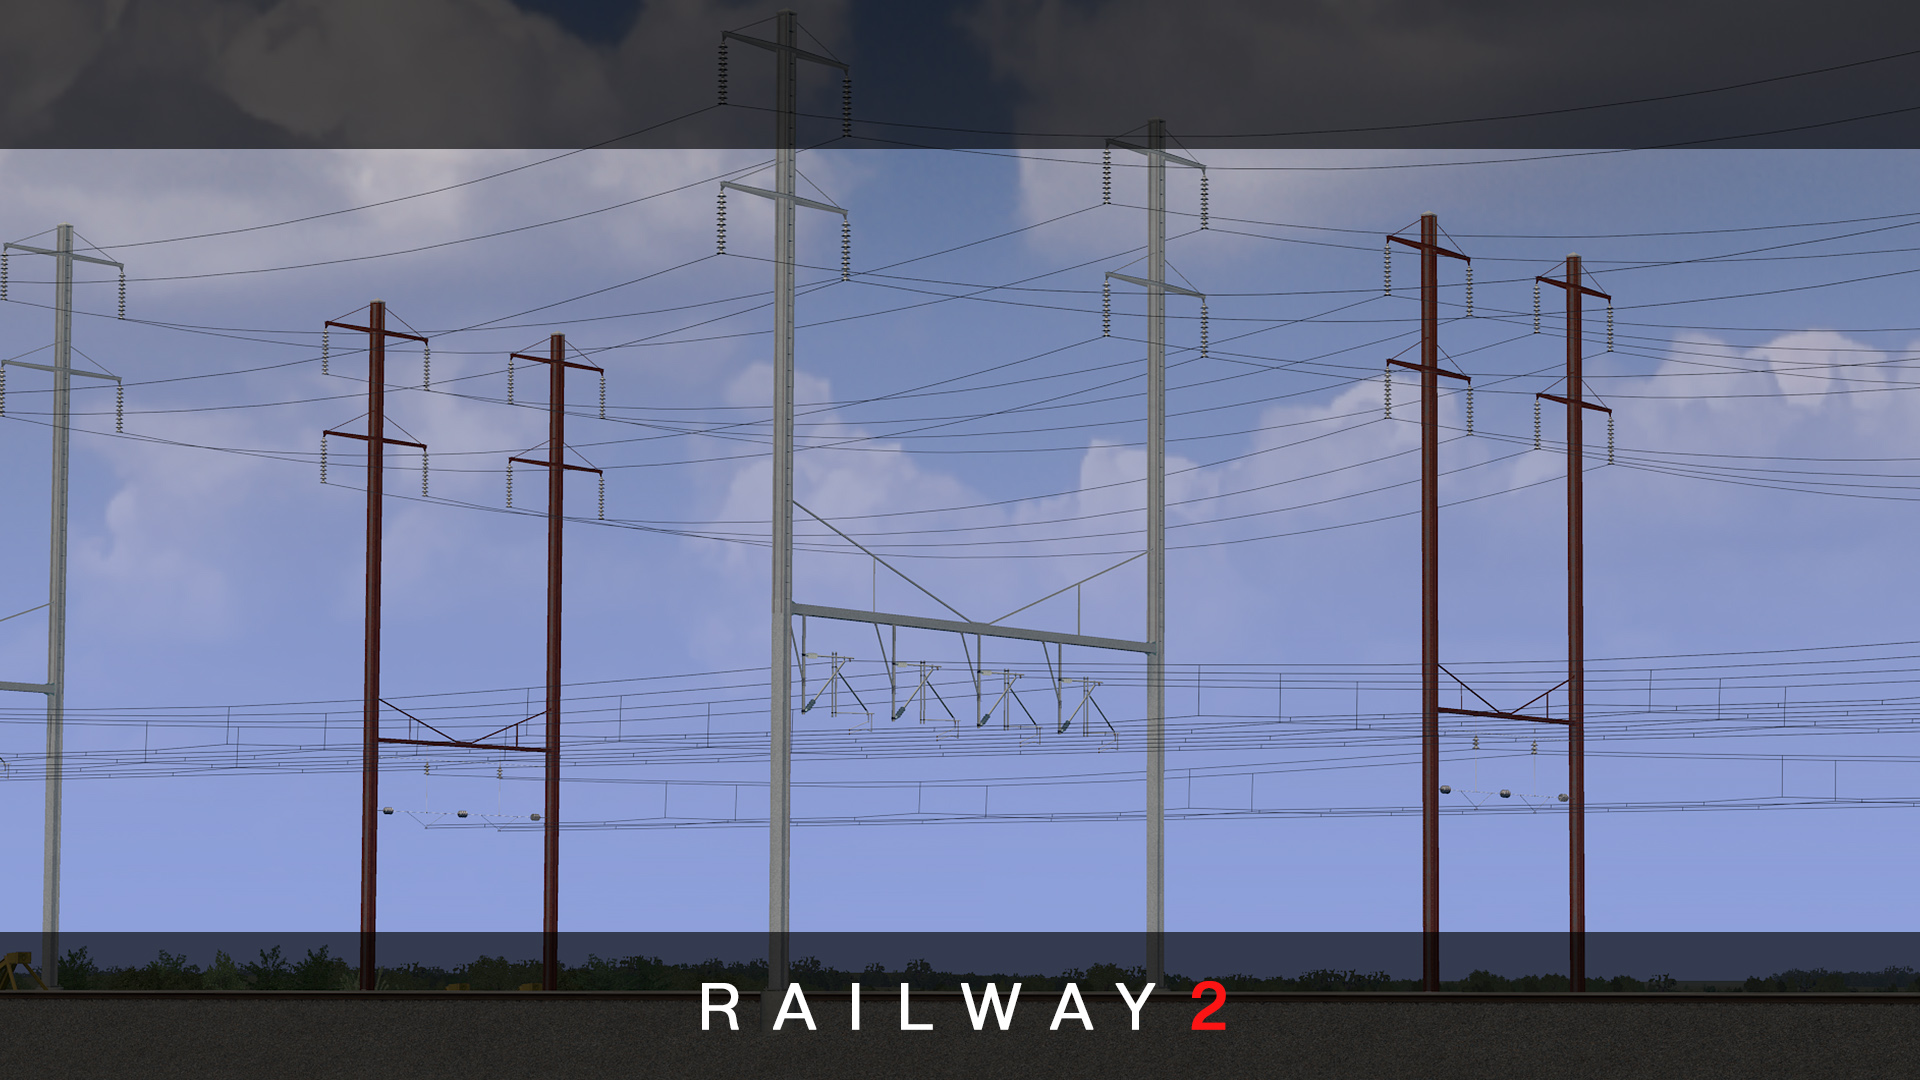 Cities: Skylines List of Railway 2 + Features + Modding Tutorial Information - 4.3 Networks: Types and Variants - 58D2576